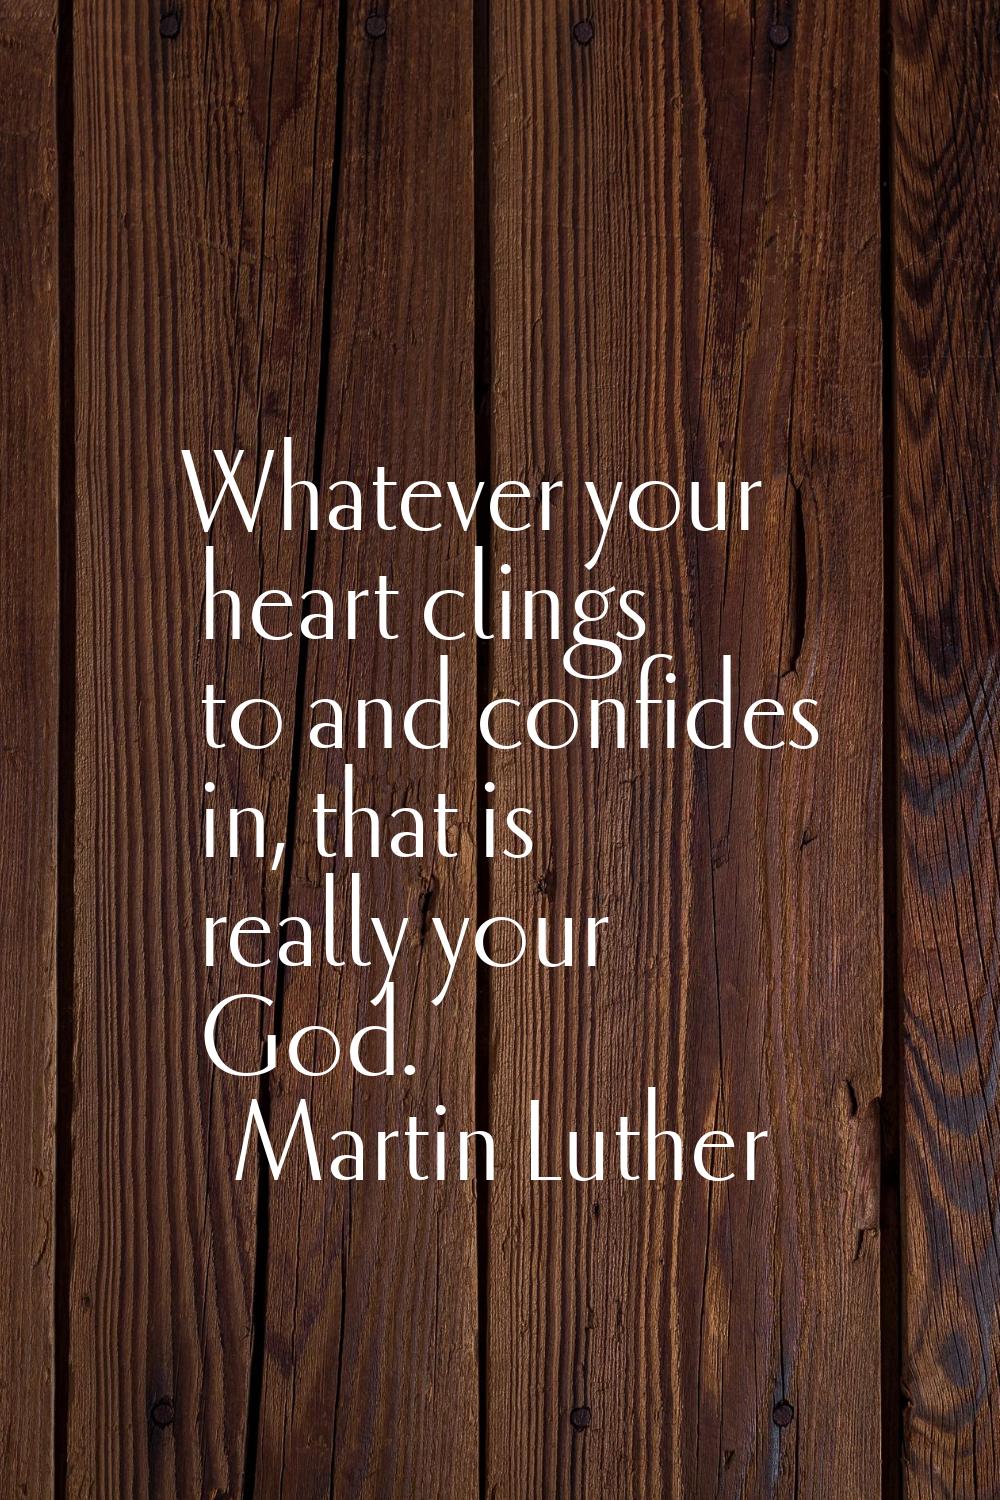 Whatever your heart clings to and confides in, that is really your God.